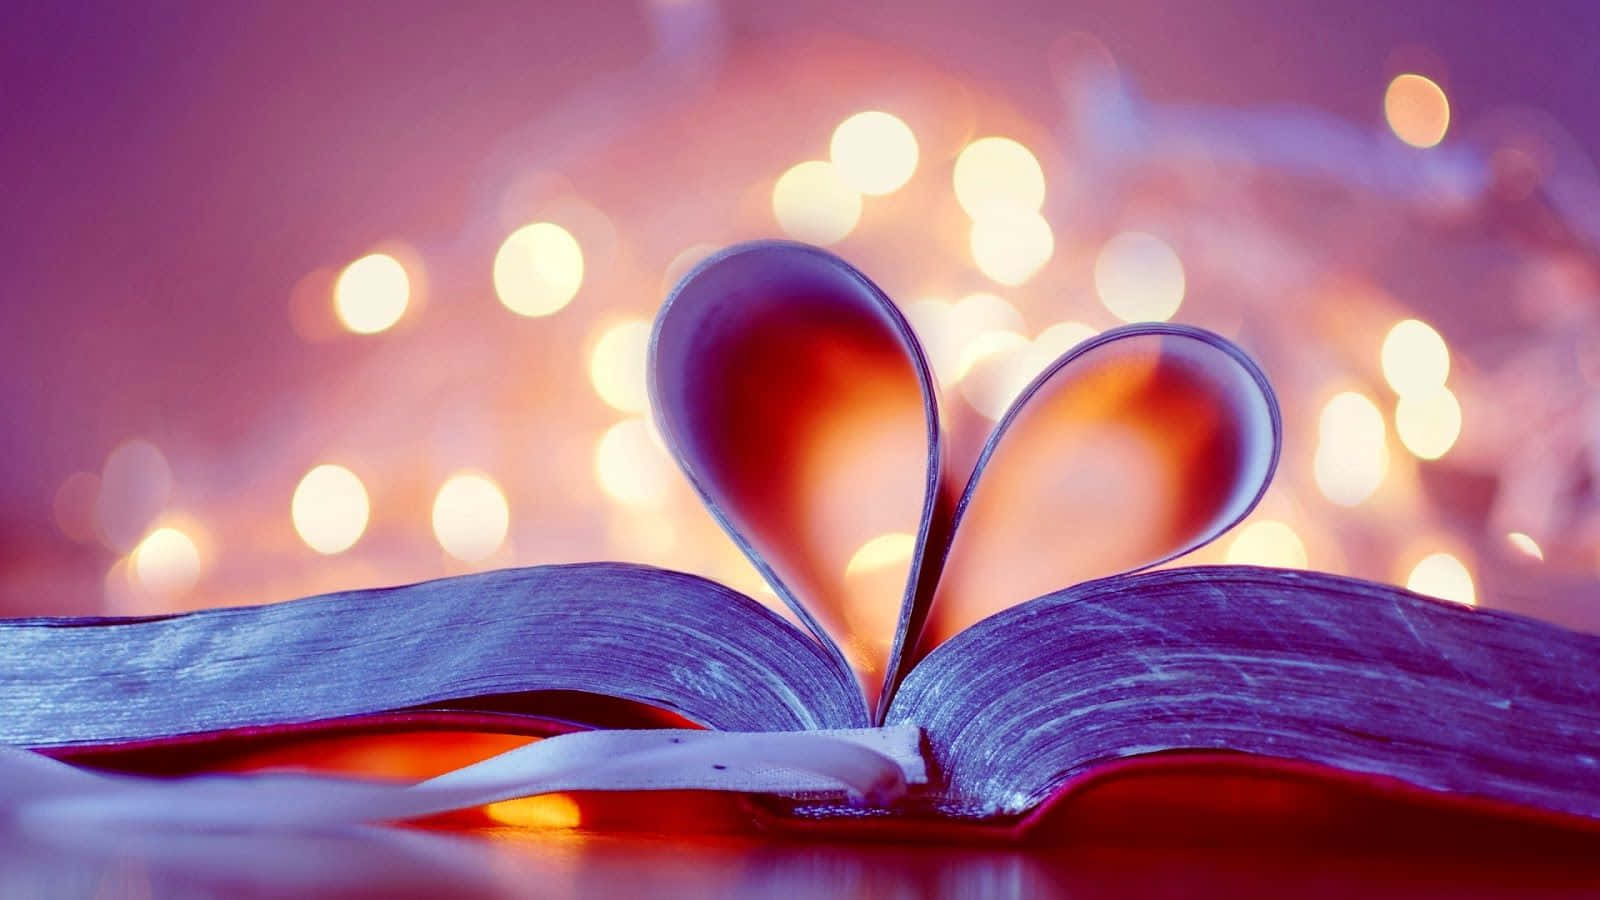 A Book With Hearts On It And Lights Behind It